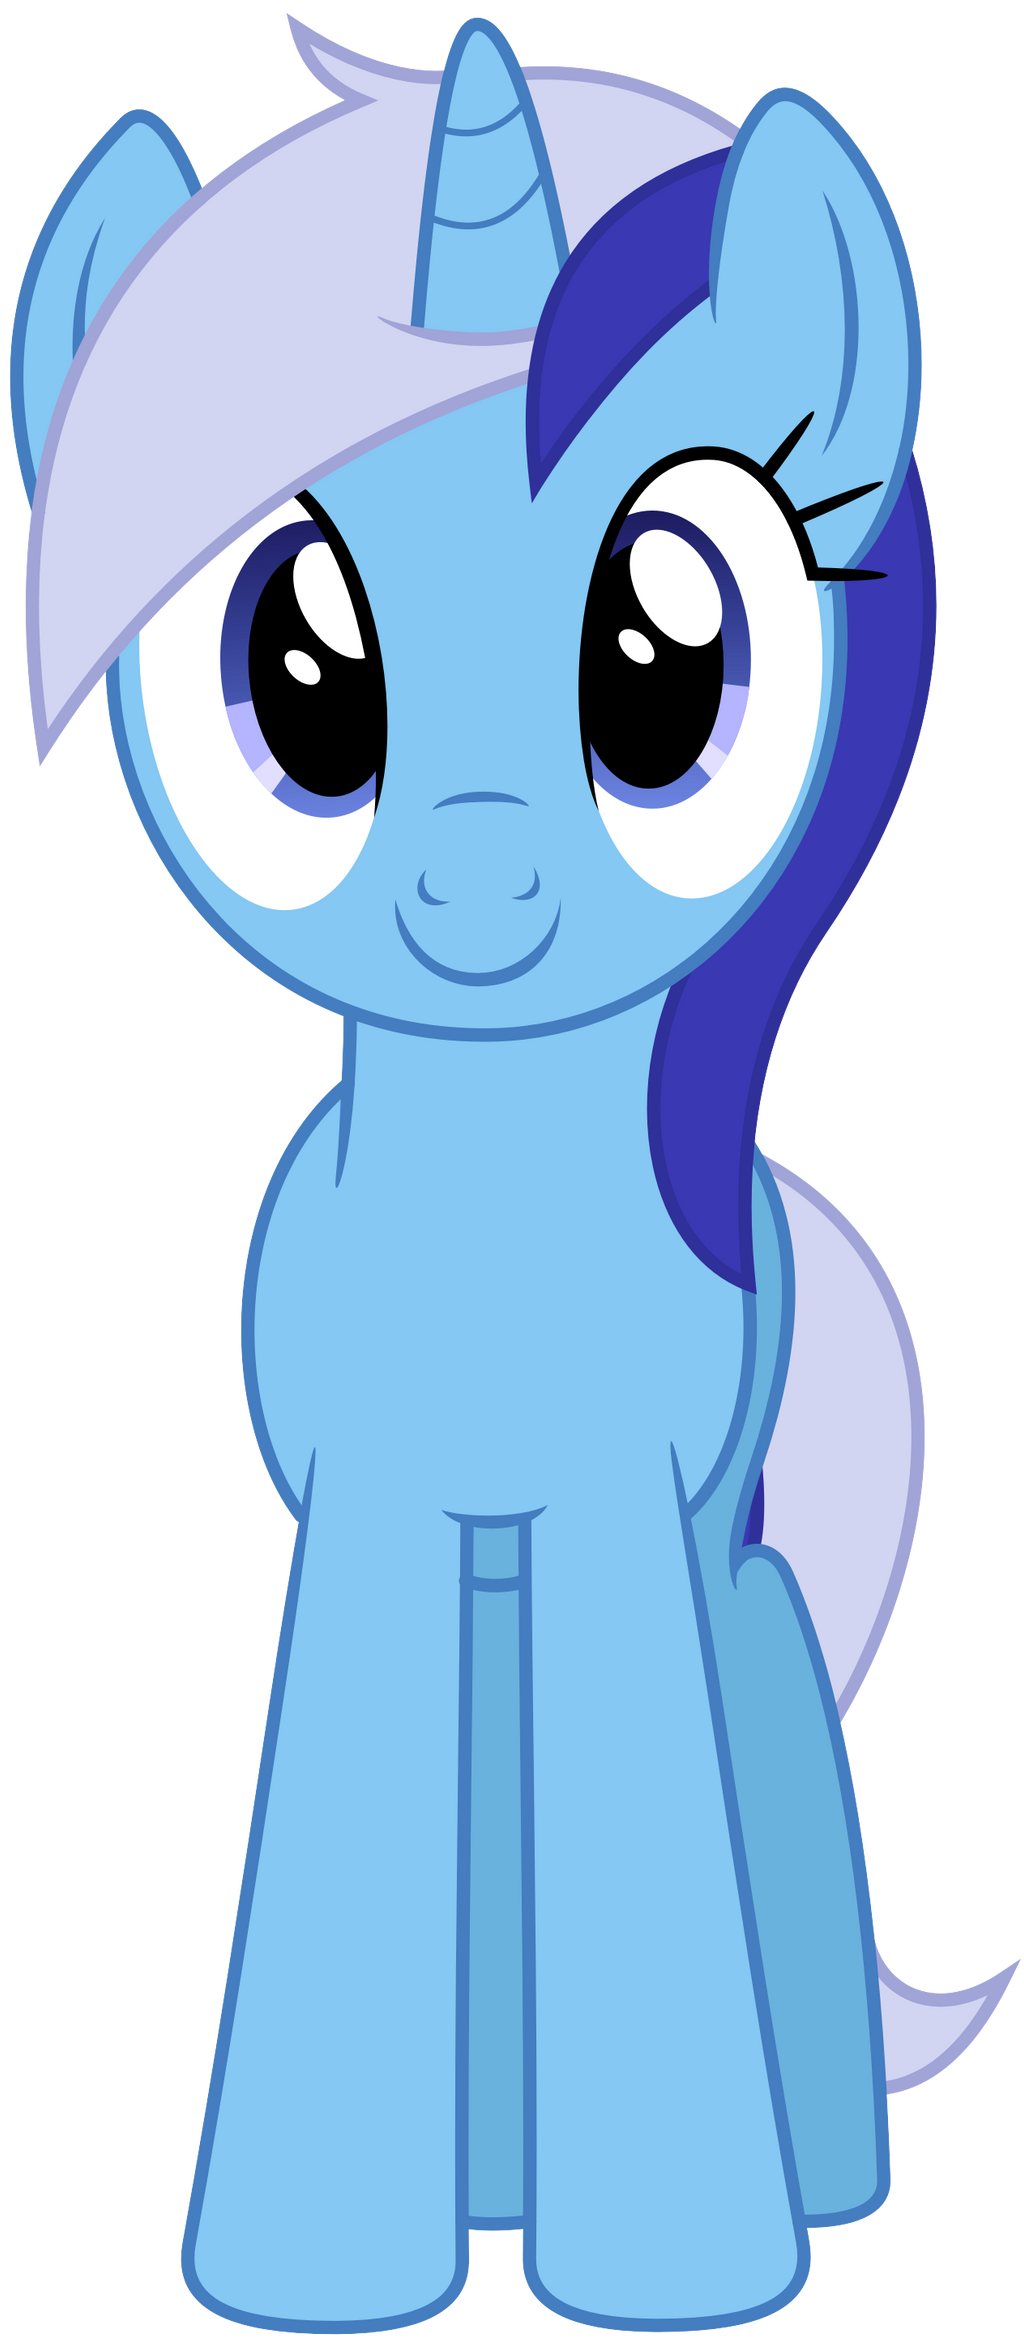 Minuette as seen in 'Leap of Faith'